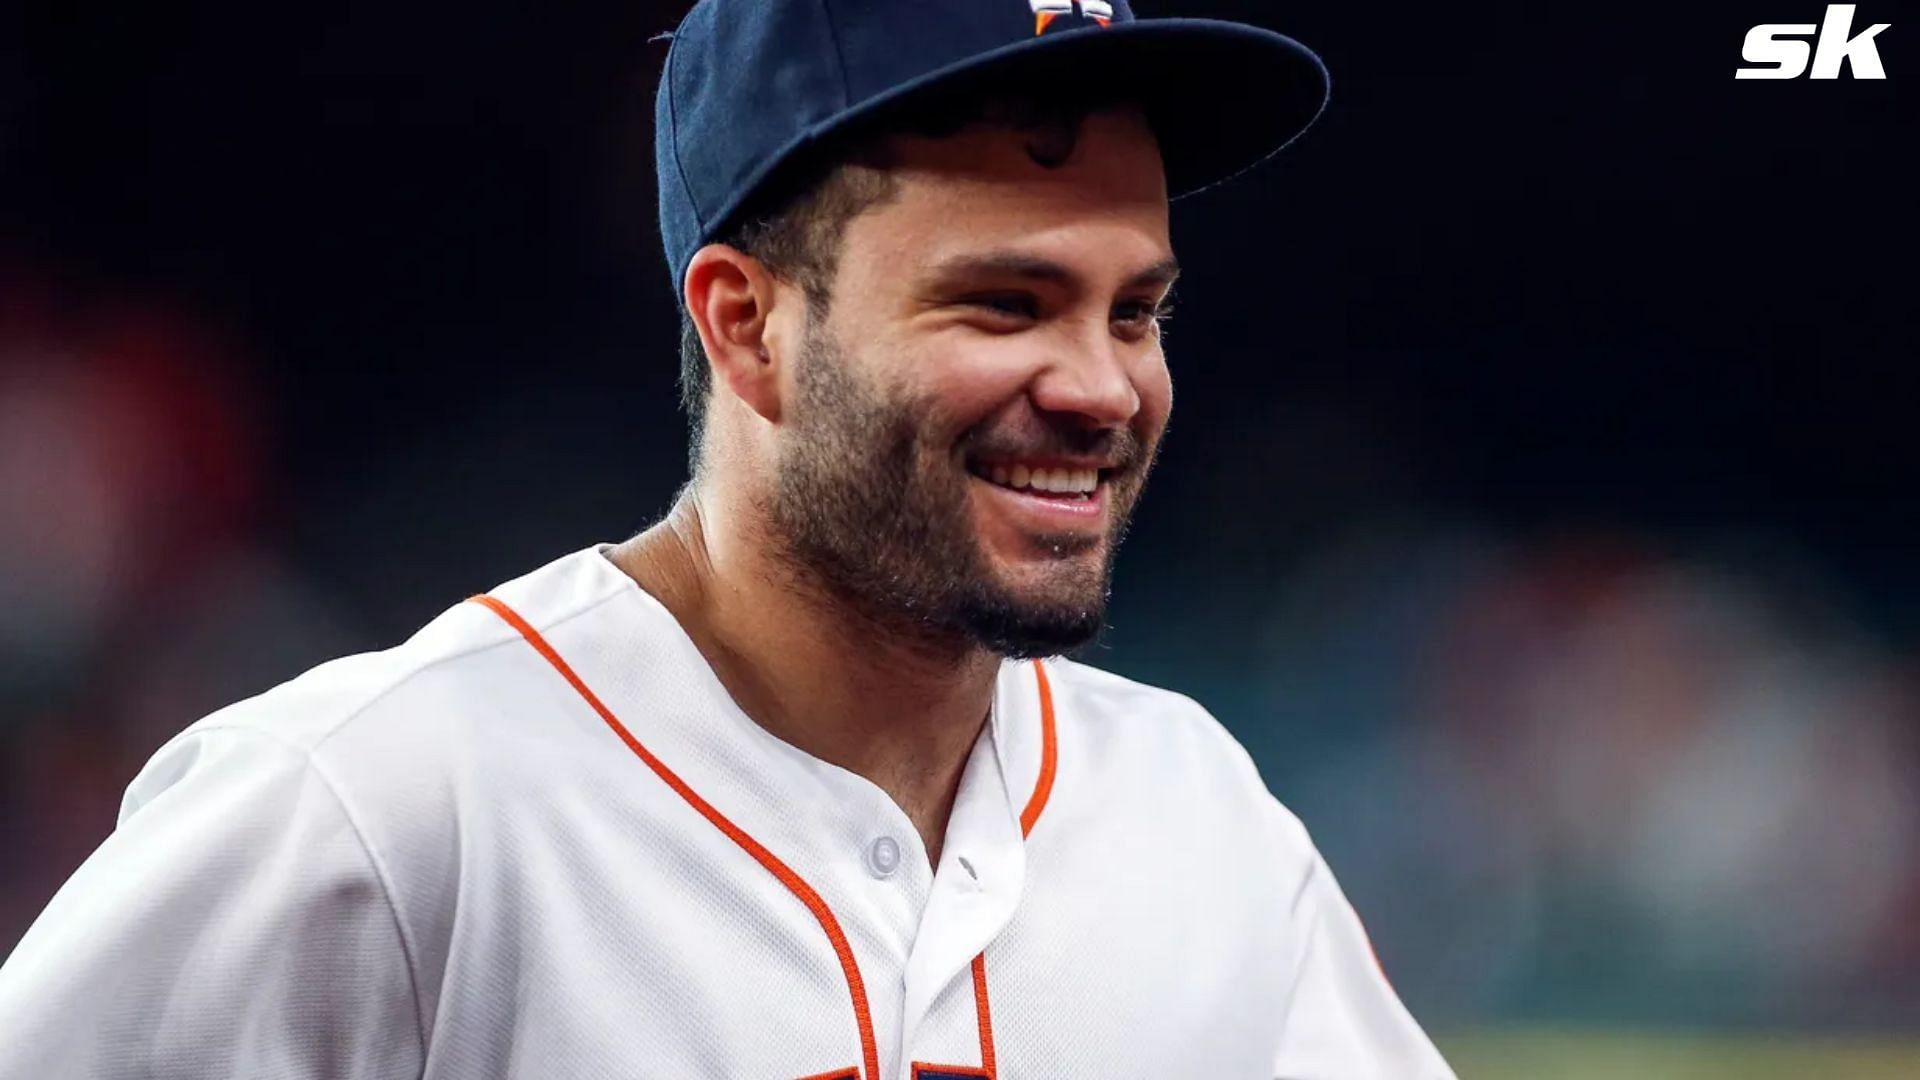 Astros Cheating in 2019 ALCS? Don't Rip My Shirt! - José Altuve